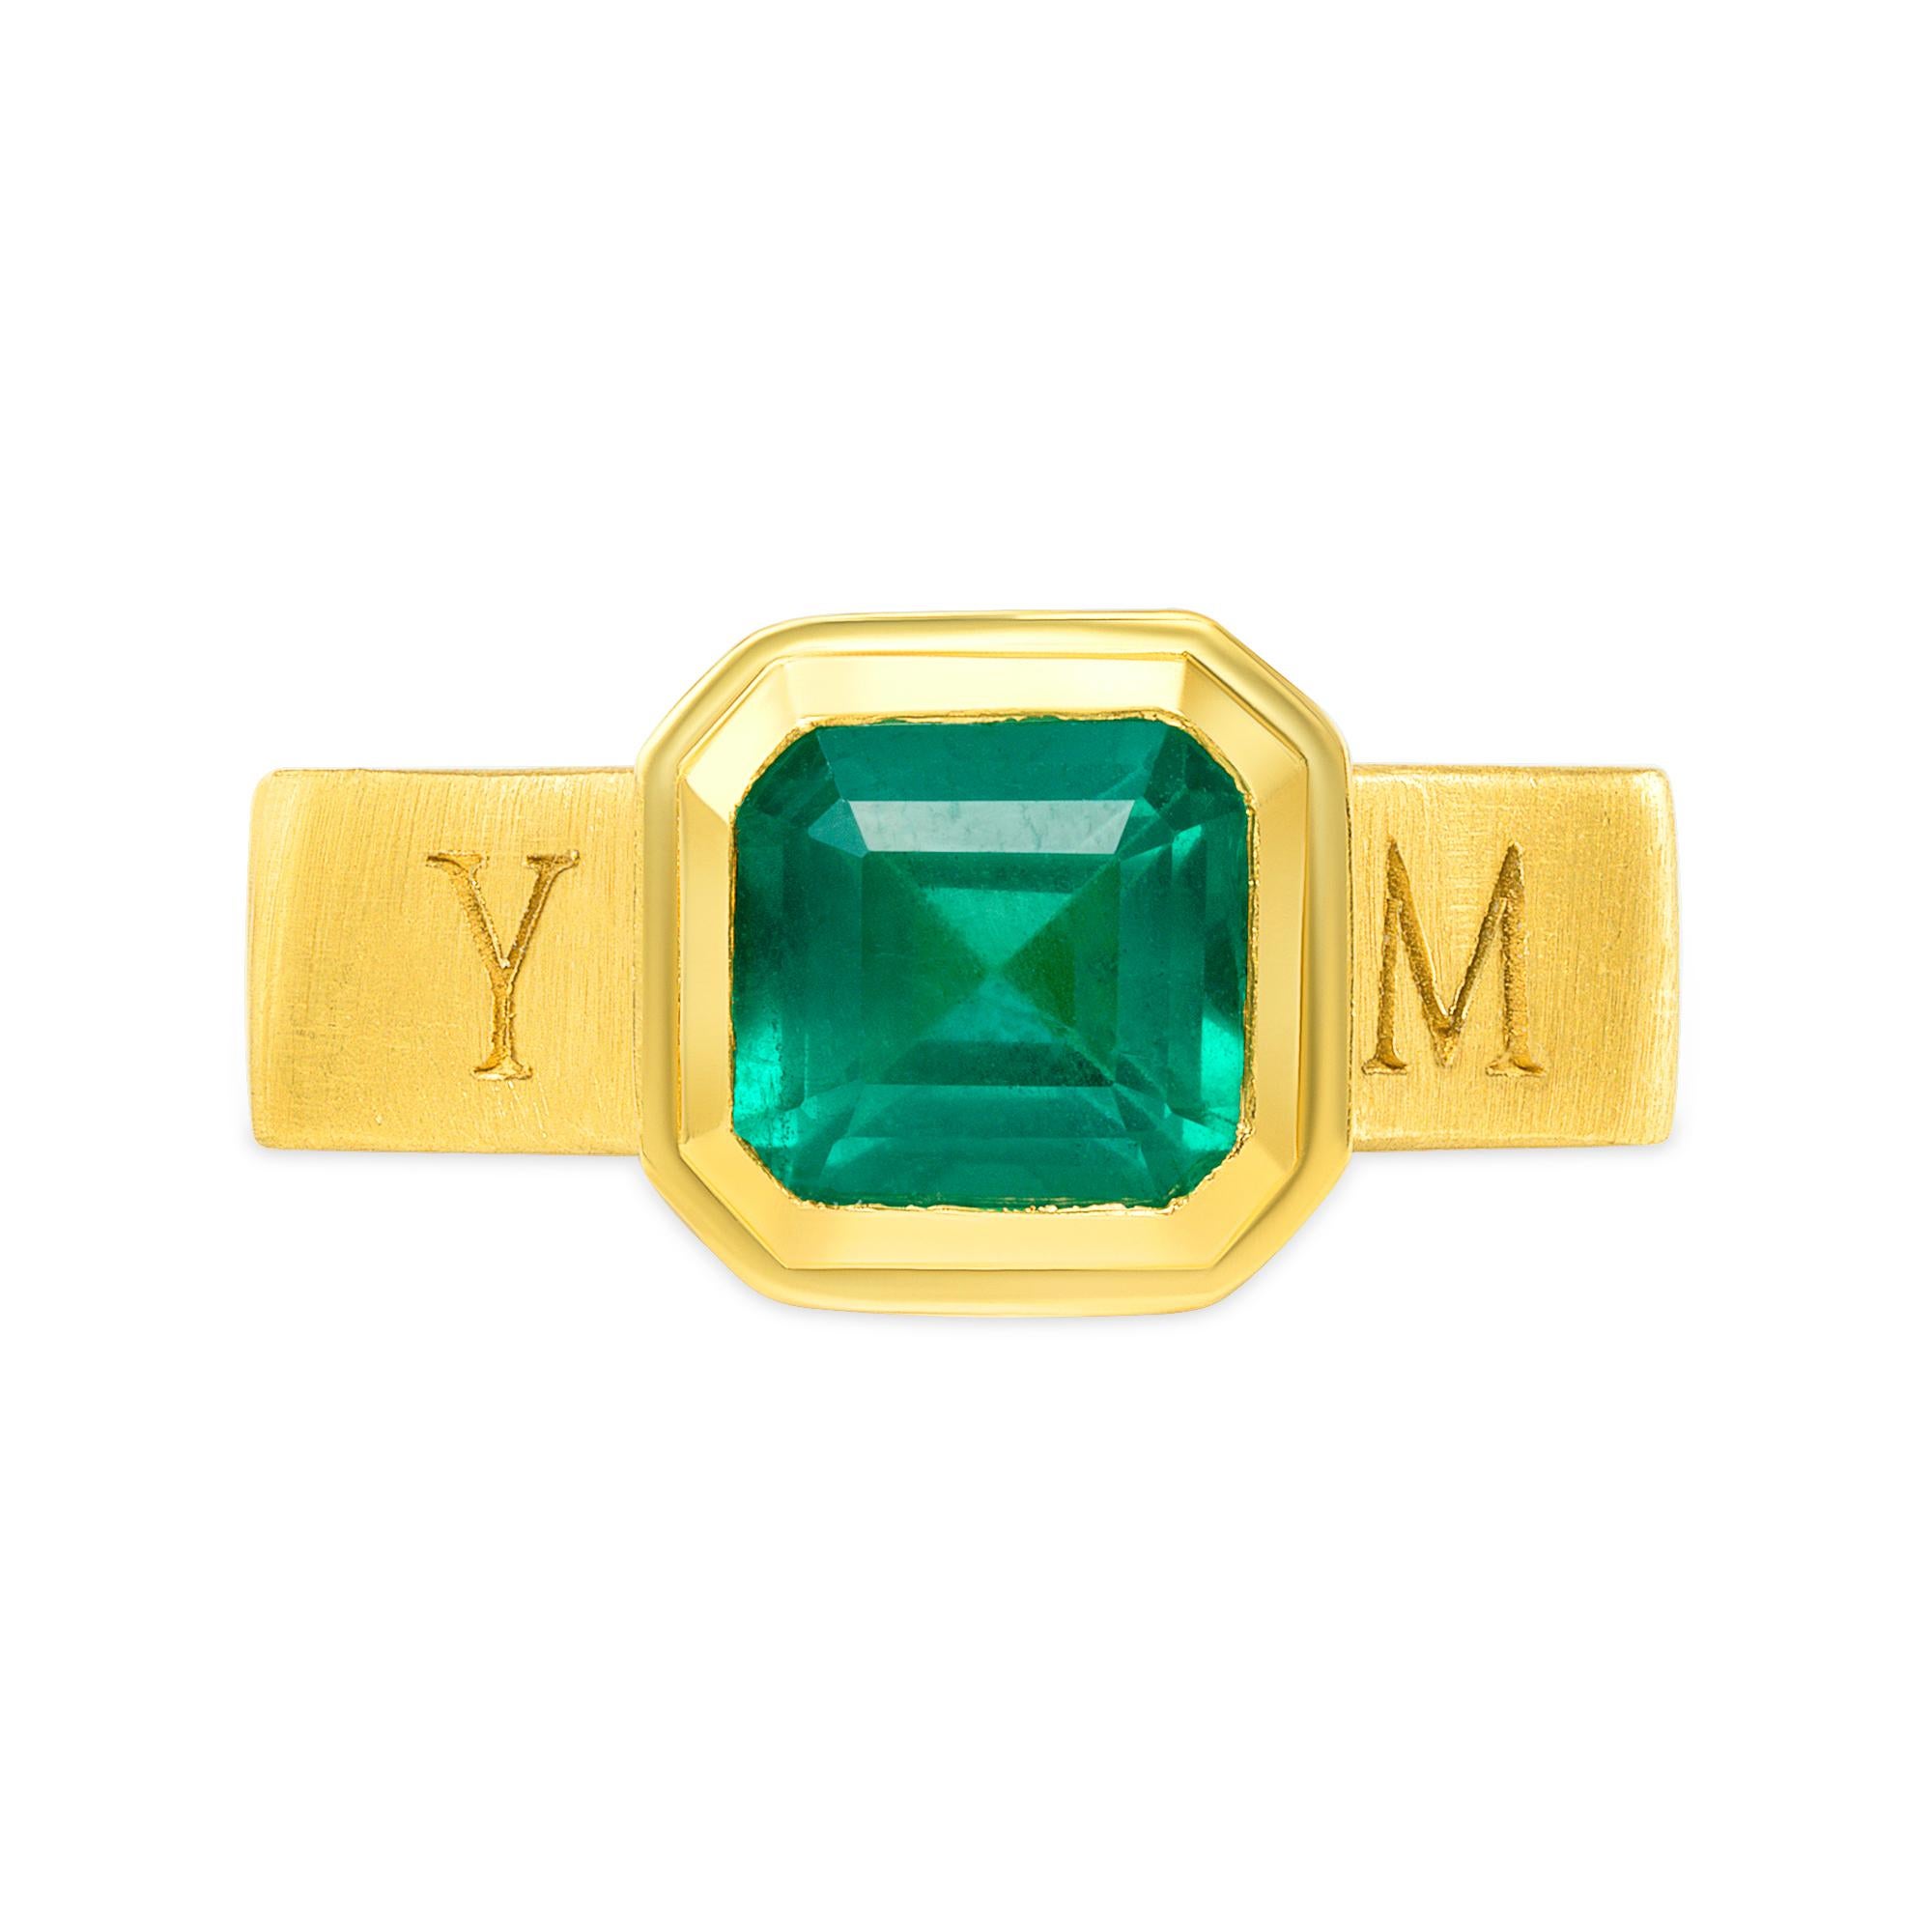 2.5 CARAT NATURAL EMERALD RING SET IN 18 KARAT GOLD

This exquisite medieval style ring features a 2.5 carat natural Zambian Emerald set in an Octagonal shaped band made of rich 18 karat yellow gold. Outer band engraved MERCURY - the Roman divine